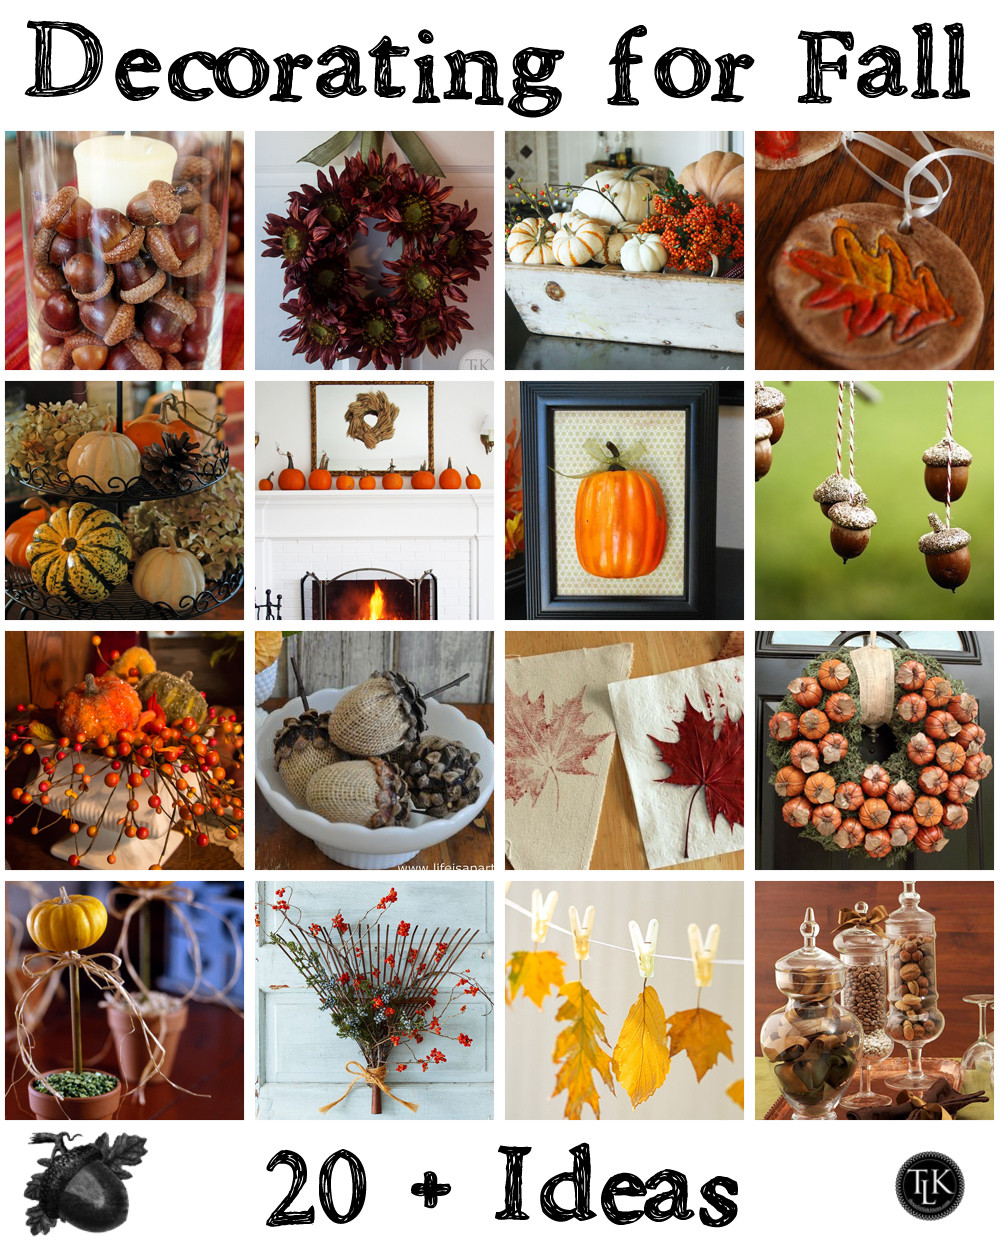 Fall Ideas Pinterest
 Decorating for Fall With Pinterest II